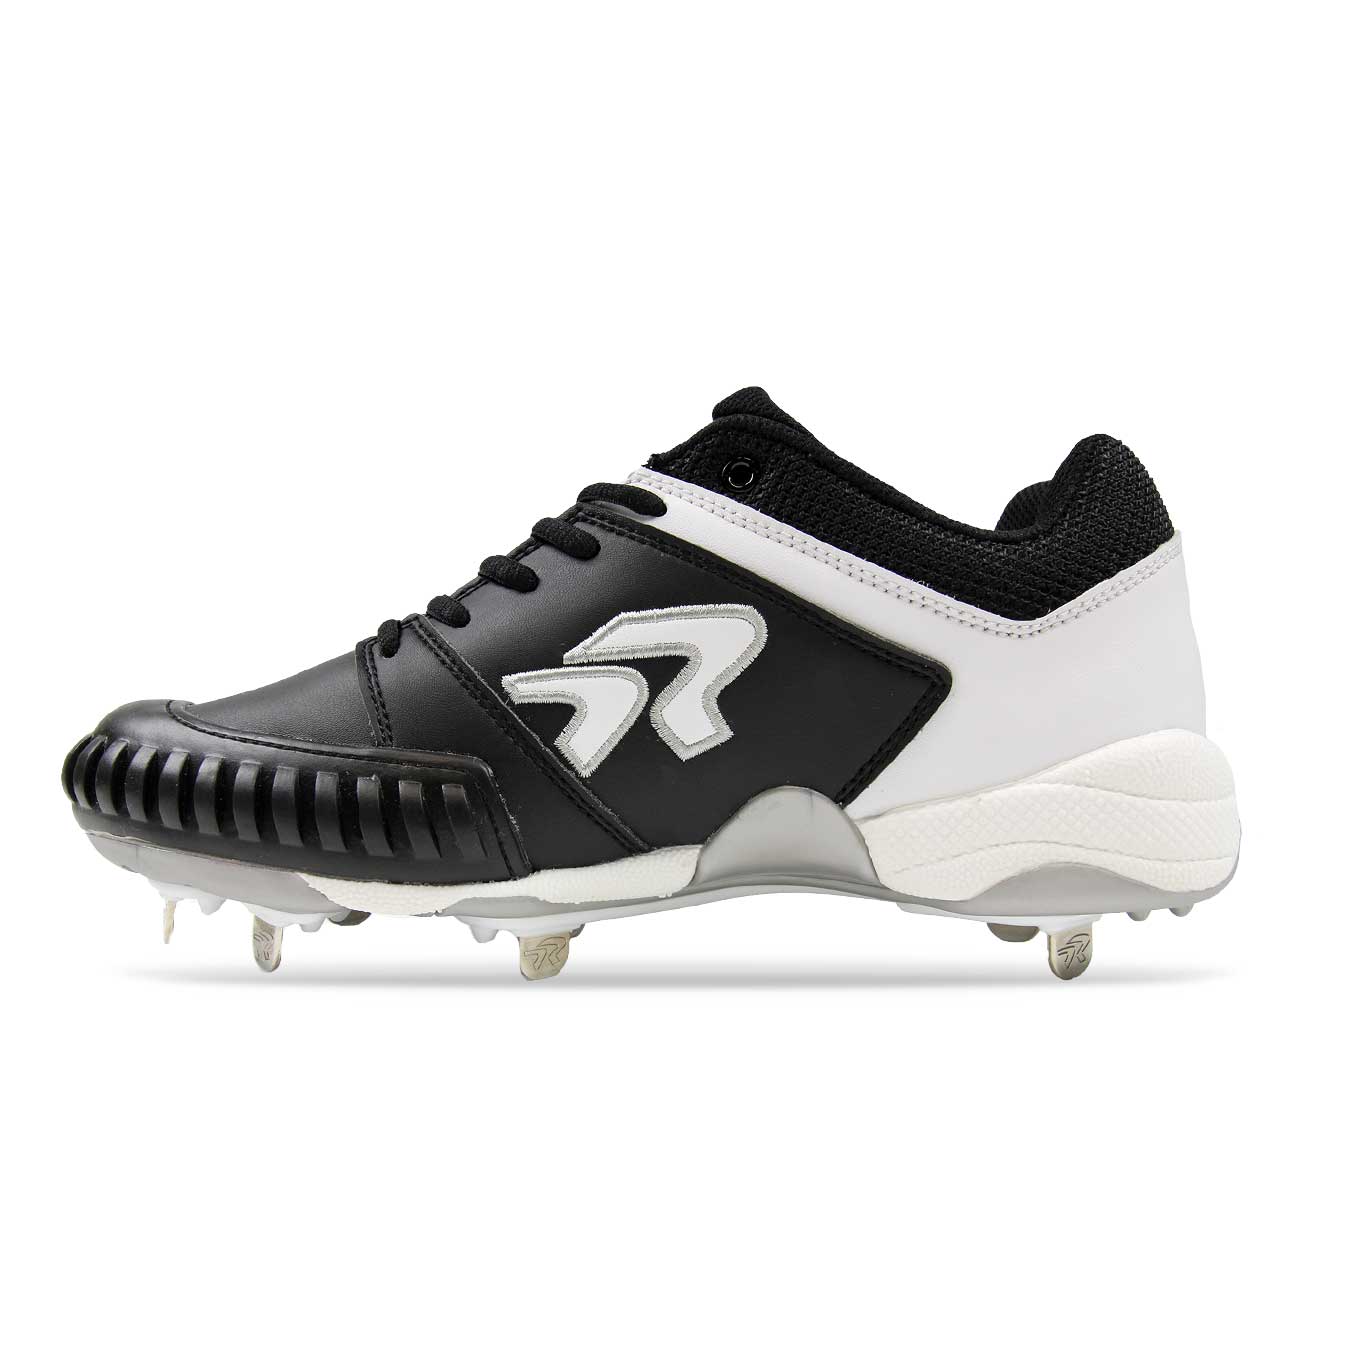 Ringor Flite Spike Womens Metal Cleat with Protective Toe